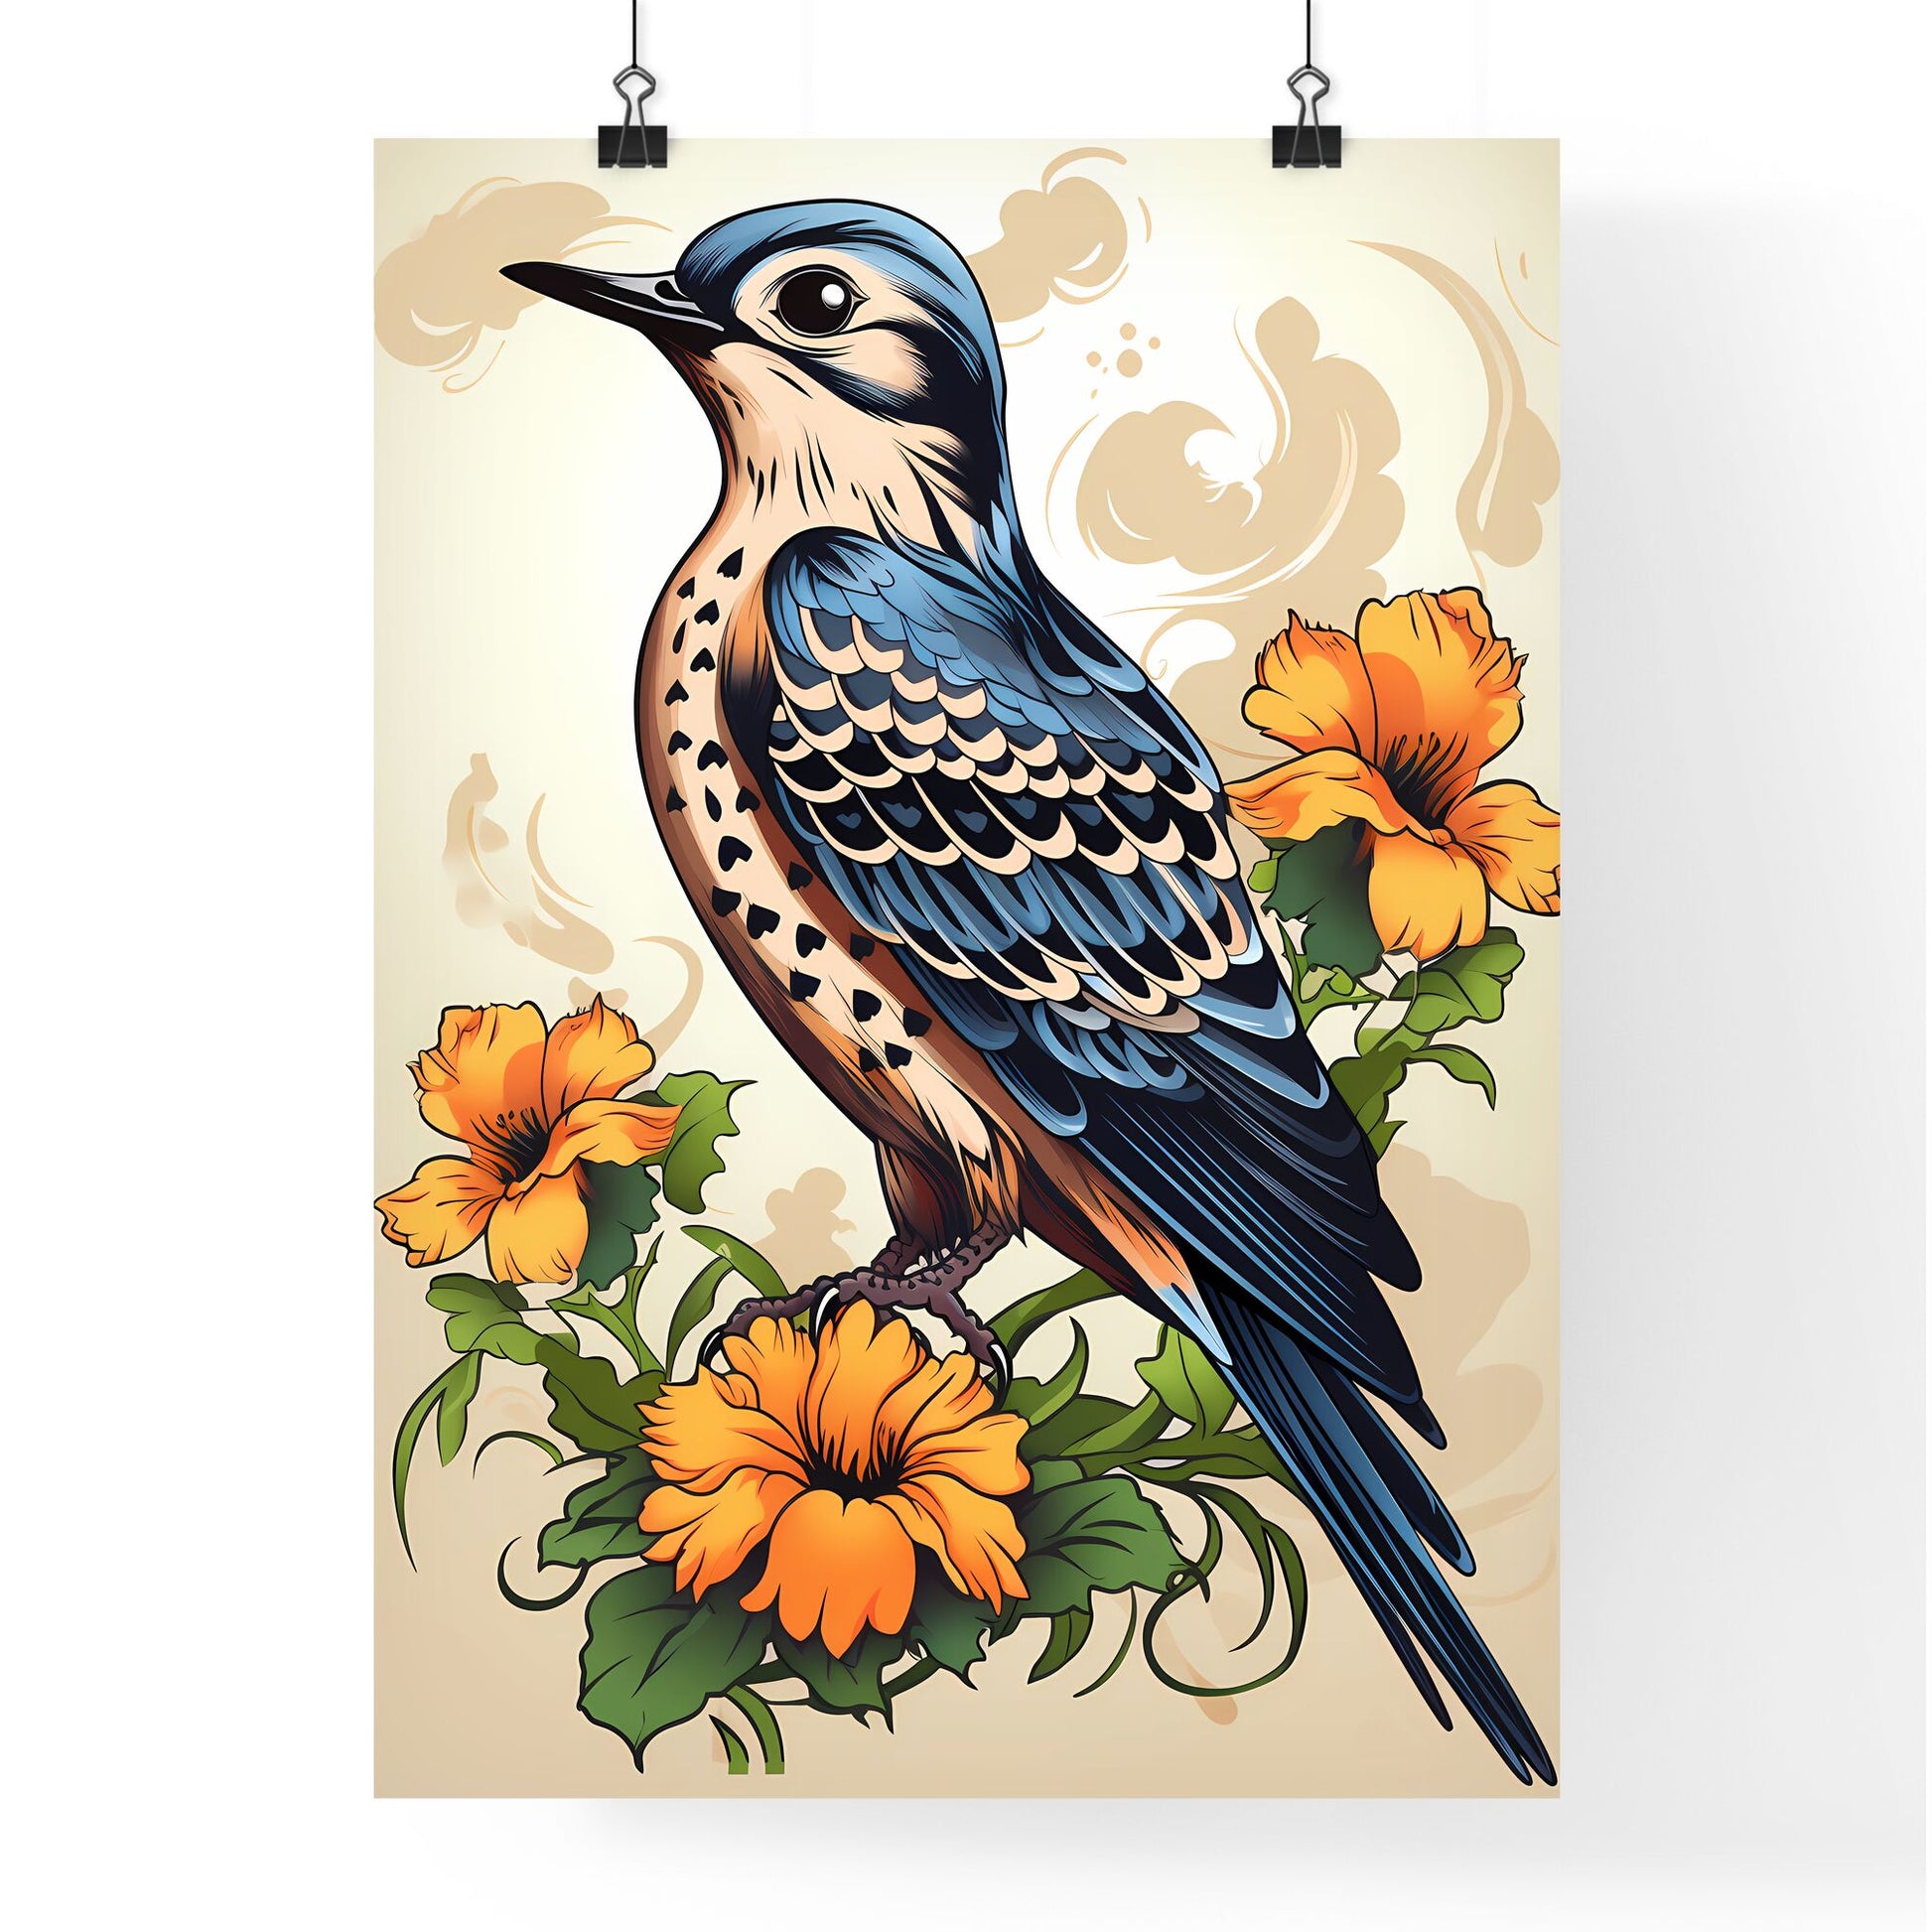 Bird On A Branch With Flowers Art Print Default Title